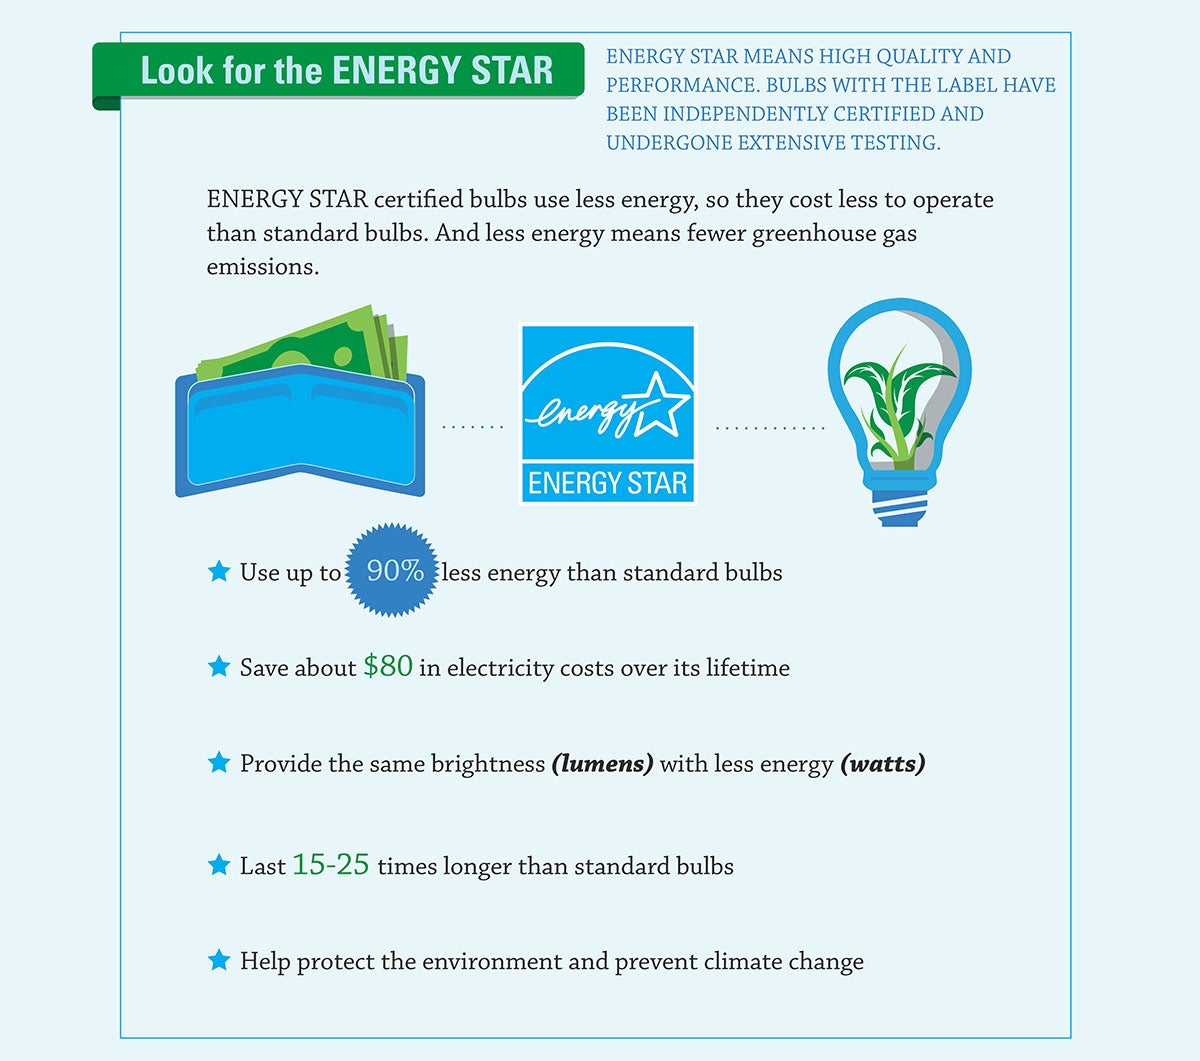 How much energy and money LEDs save compared to incandescent bulbs